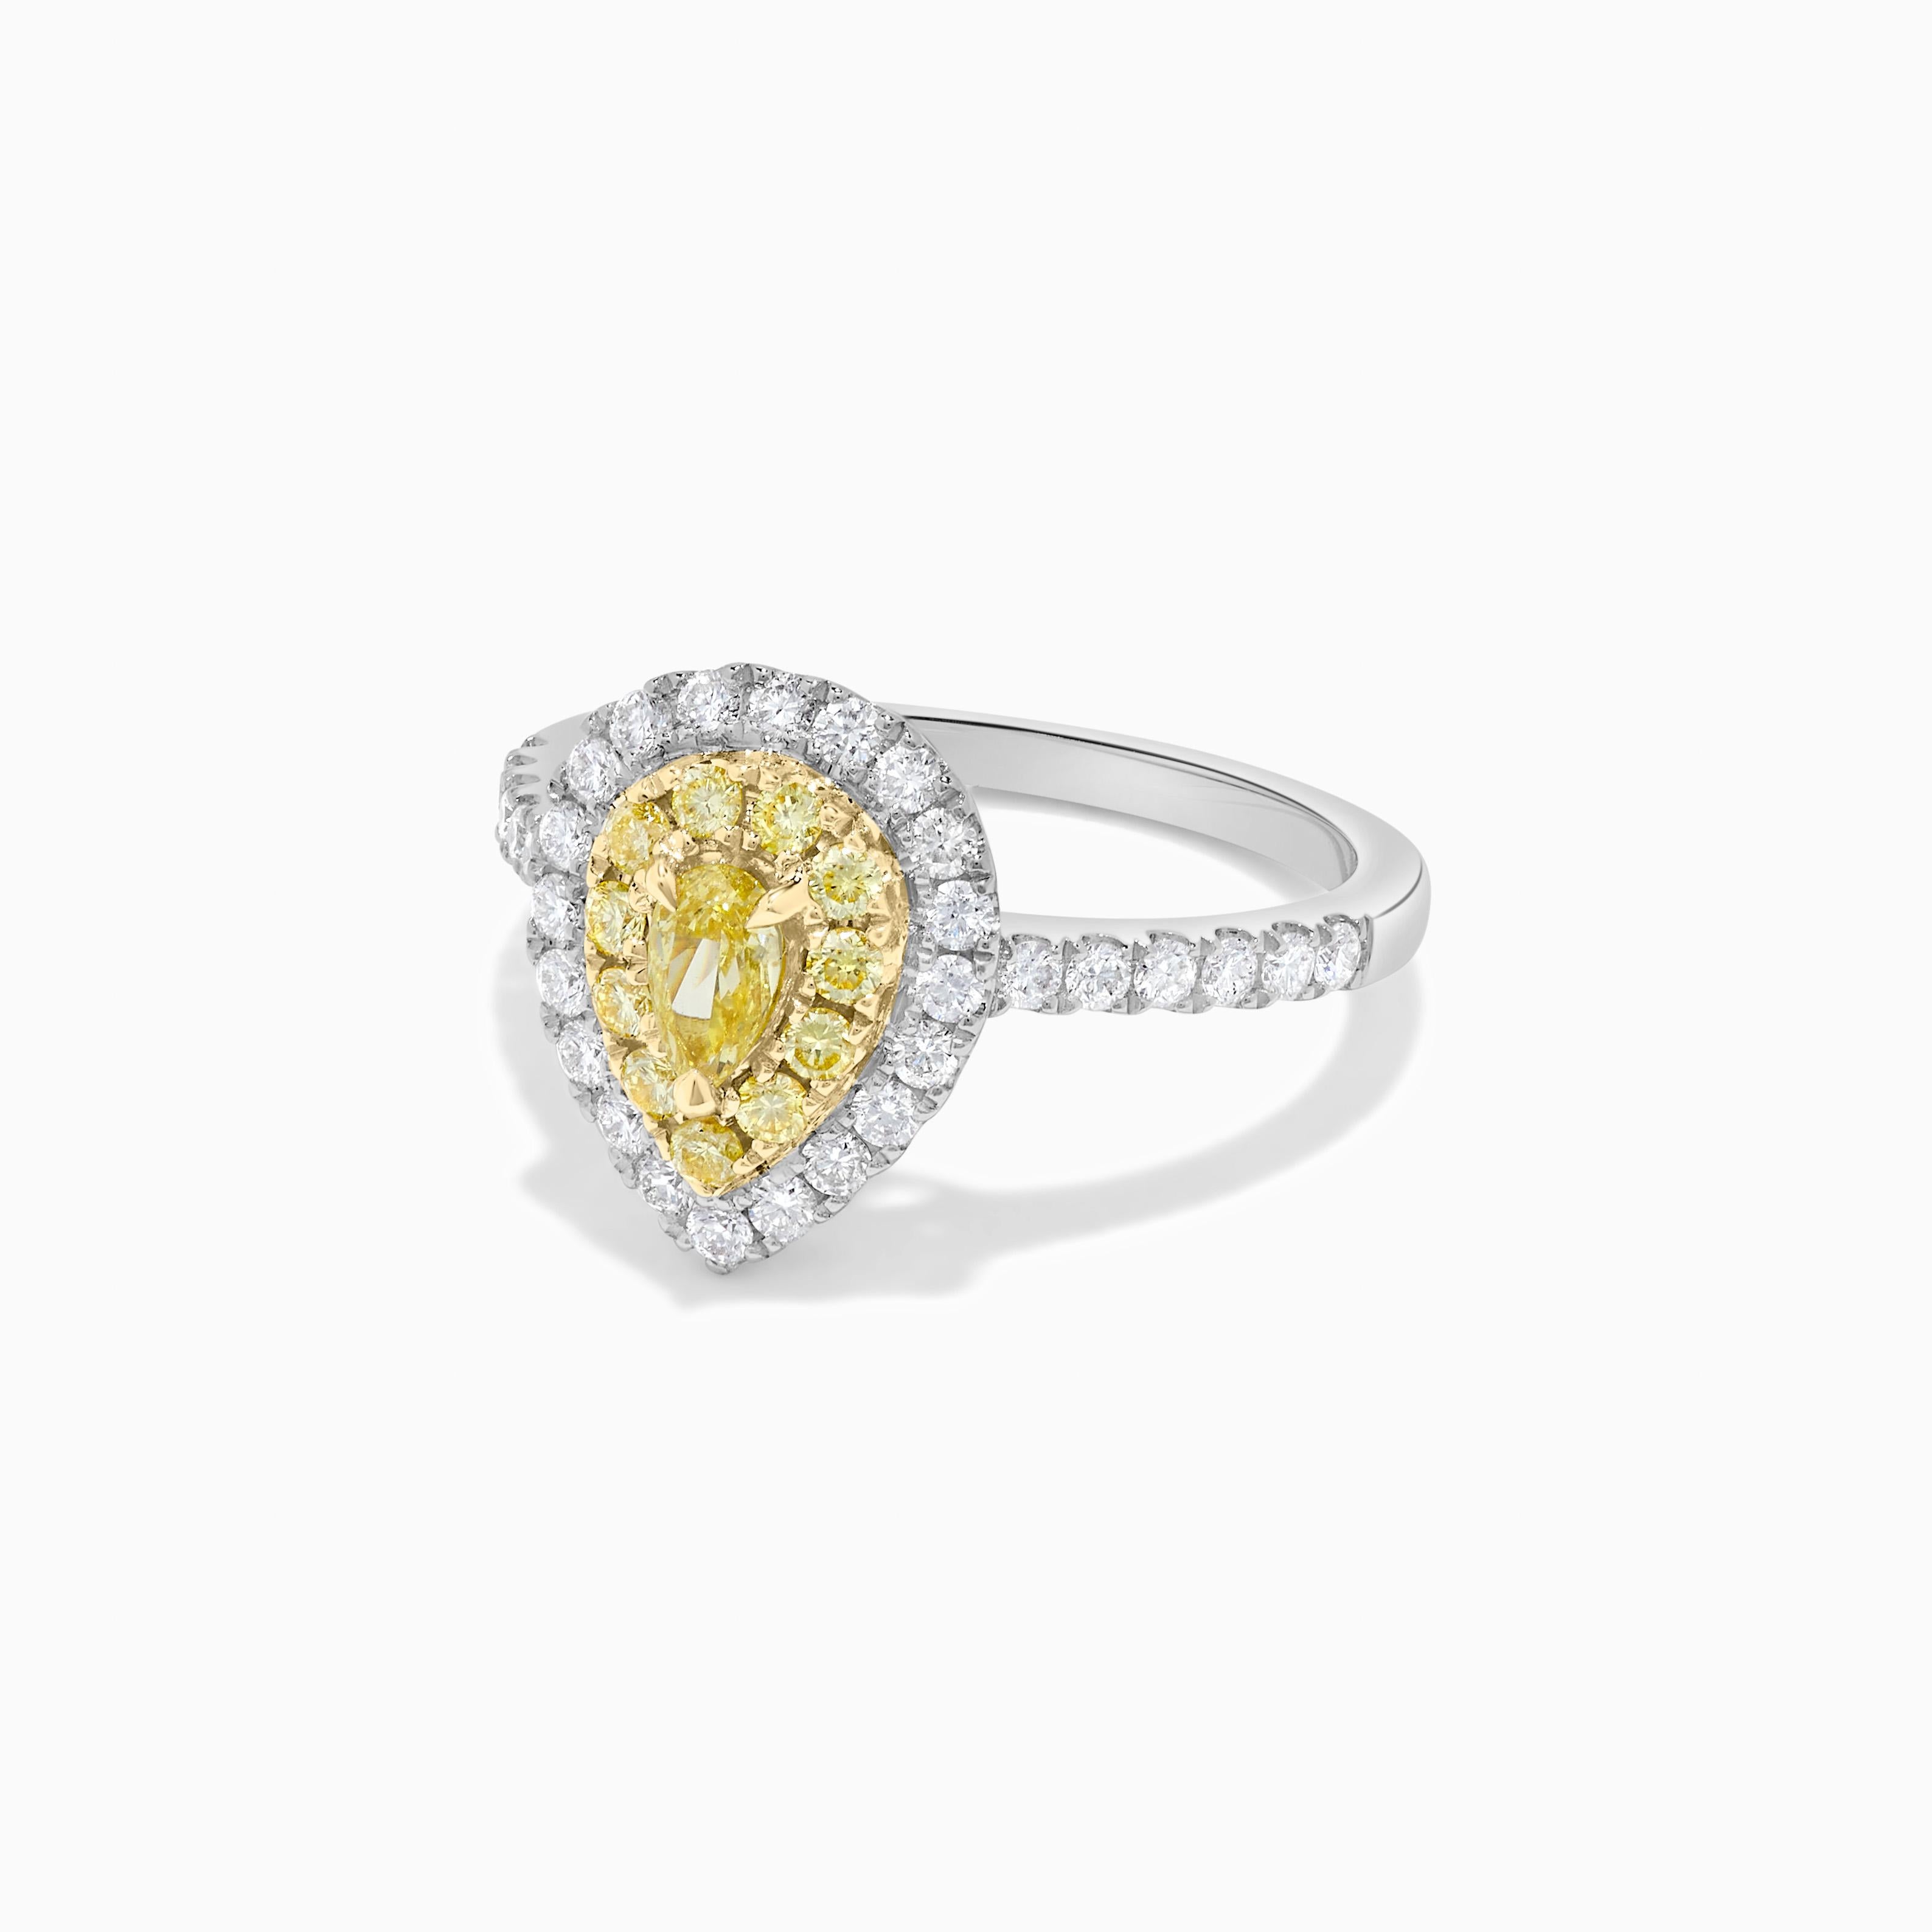 RareGemWorld's classic diamond ring. Mounted in a beautiful 18K Gold and Platinum setting with a natural pear cut yellow diamond. The yellow diamond is surrounded by round natural white diamond melee and round natural yellow diamond melee. This ring